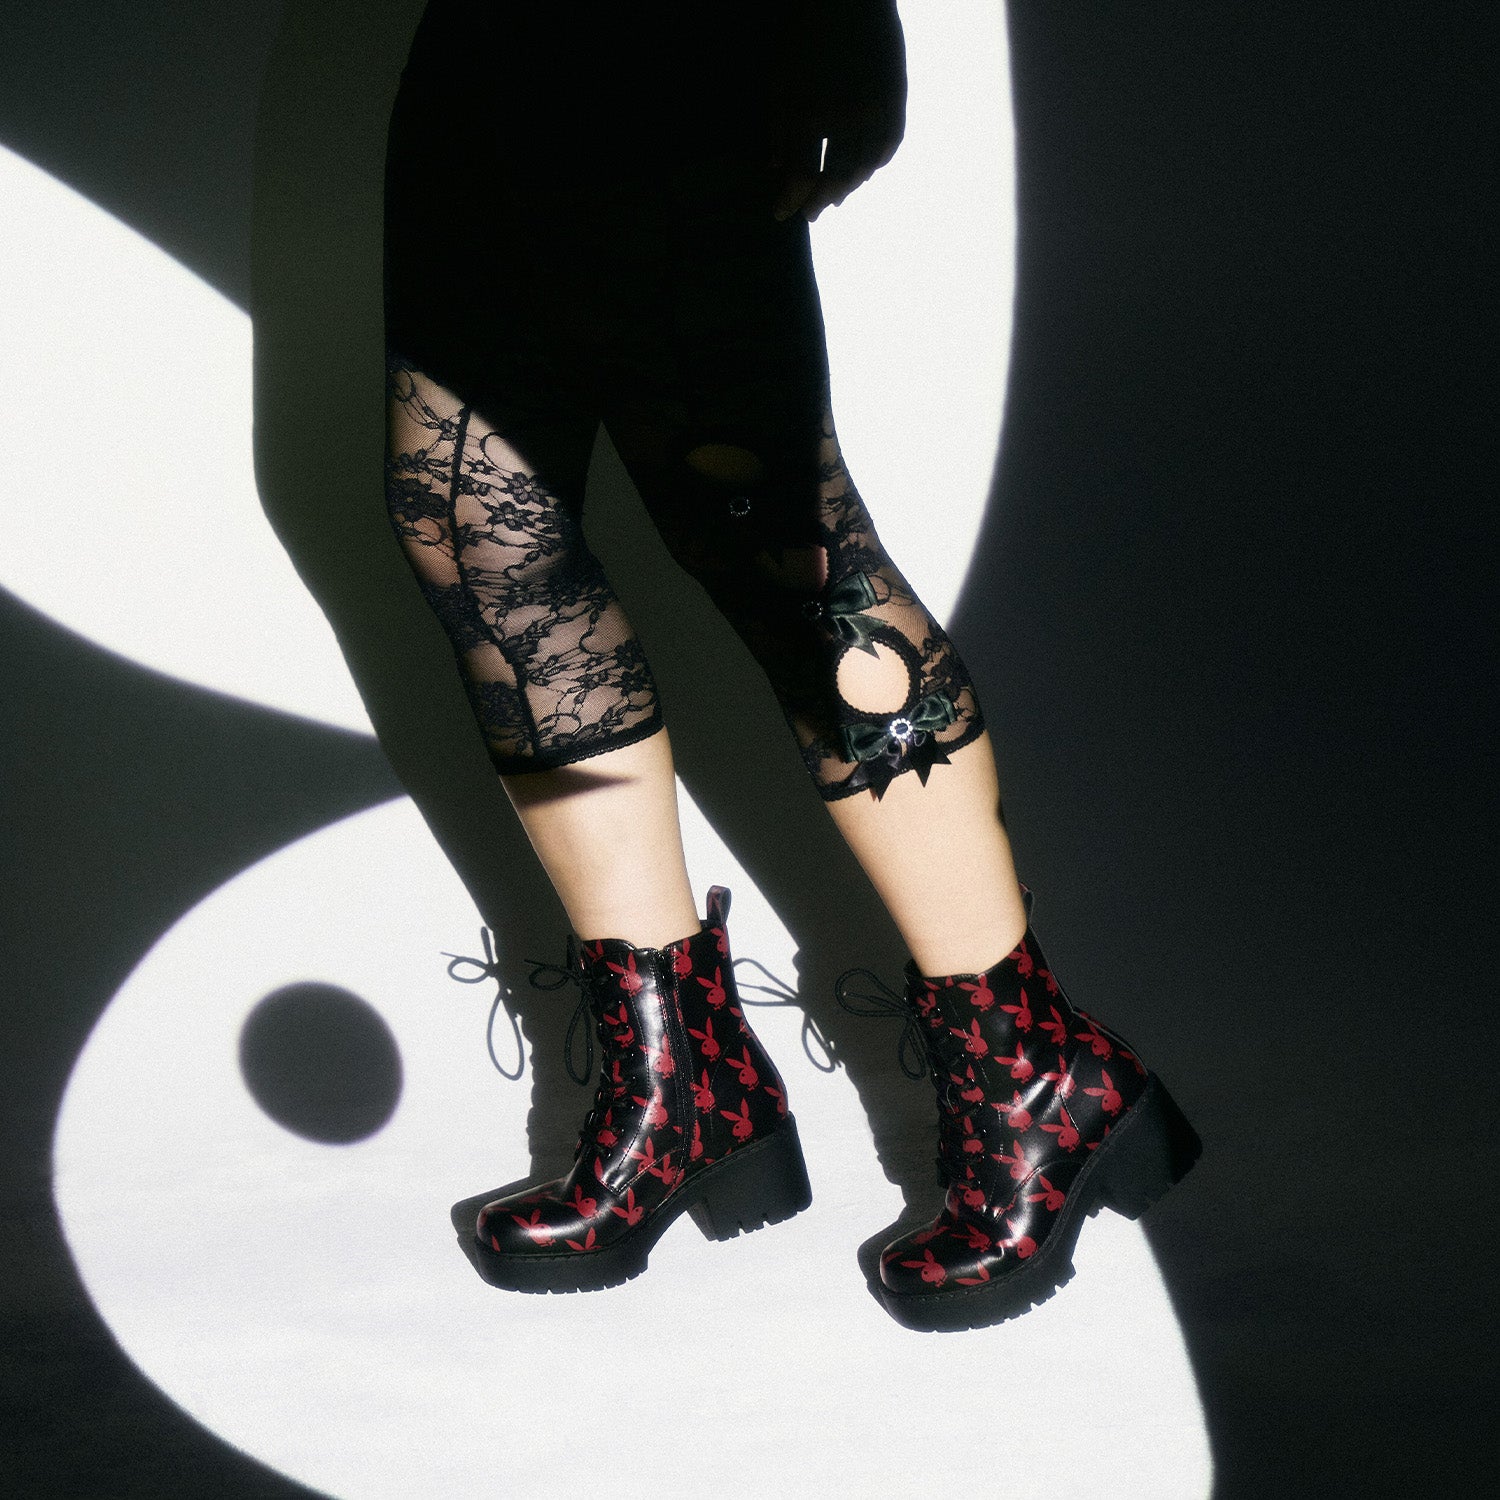 Playboy Reprise Red Switch Boots - Ankle Boots - KOI Footwear - Black - Model View